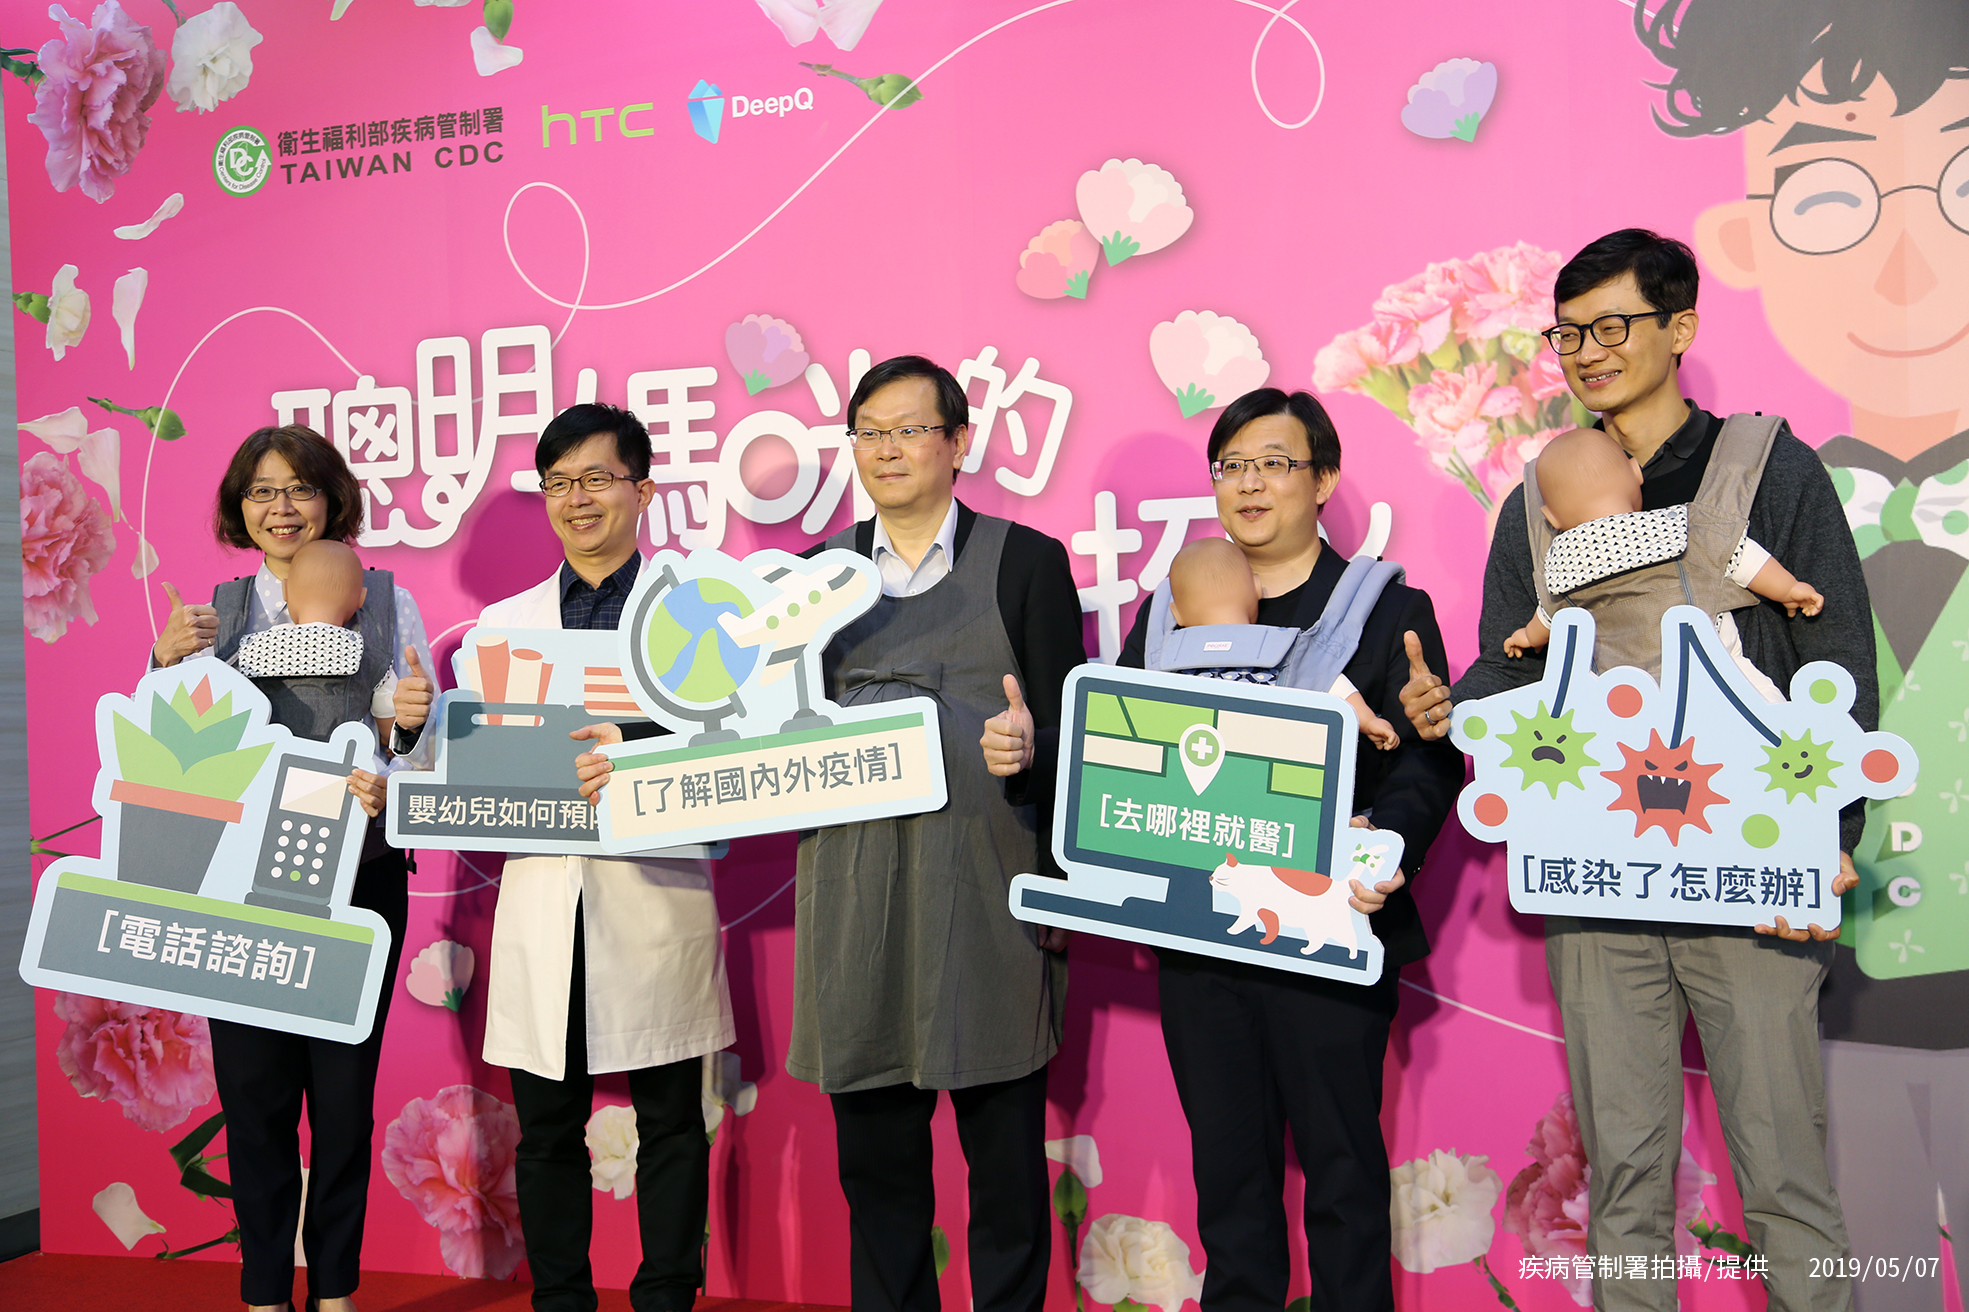 Participants included Epidemic Intelligence Center Director Liu Ding-ping of Taiwan CDC, acclaimed pediatrician: Dr. Chen Mu-jung,Taiwan CDC Deputy Director-General Chuang Jen-hsiang, and HTC DeepQ Senior Director Jerry Cheng.jpg